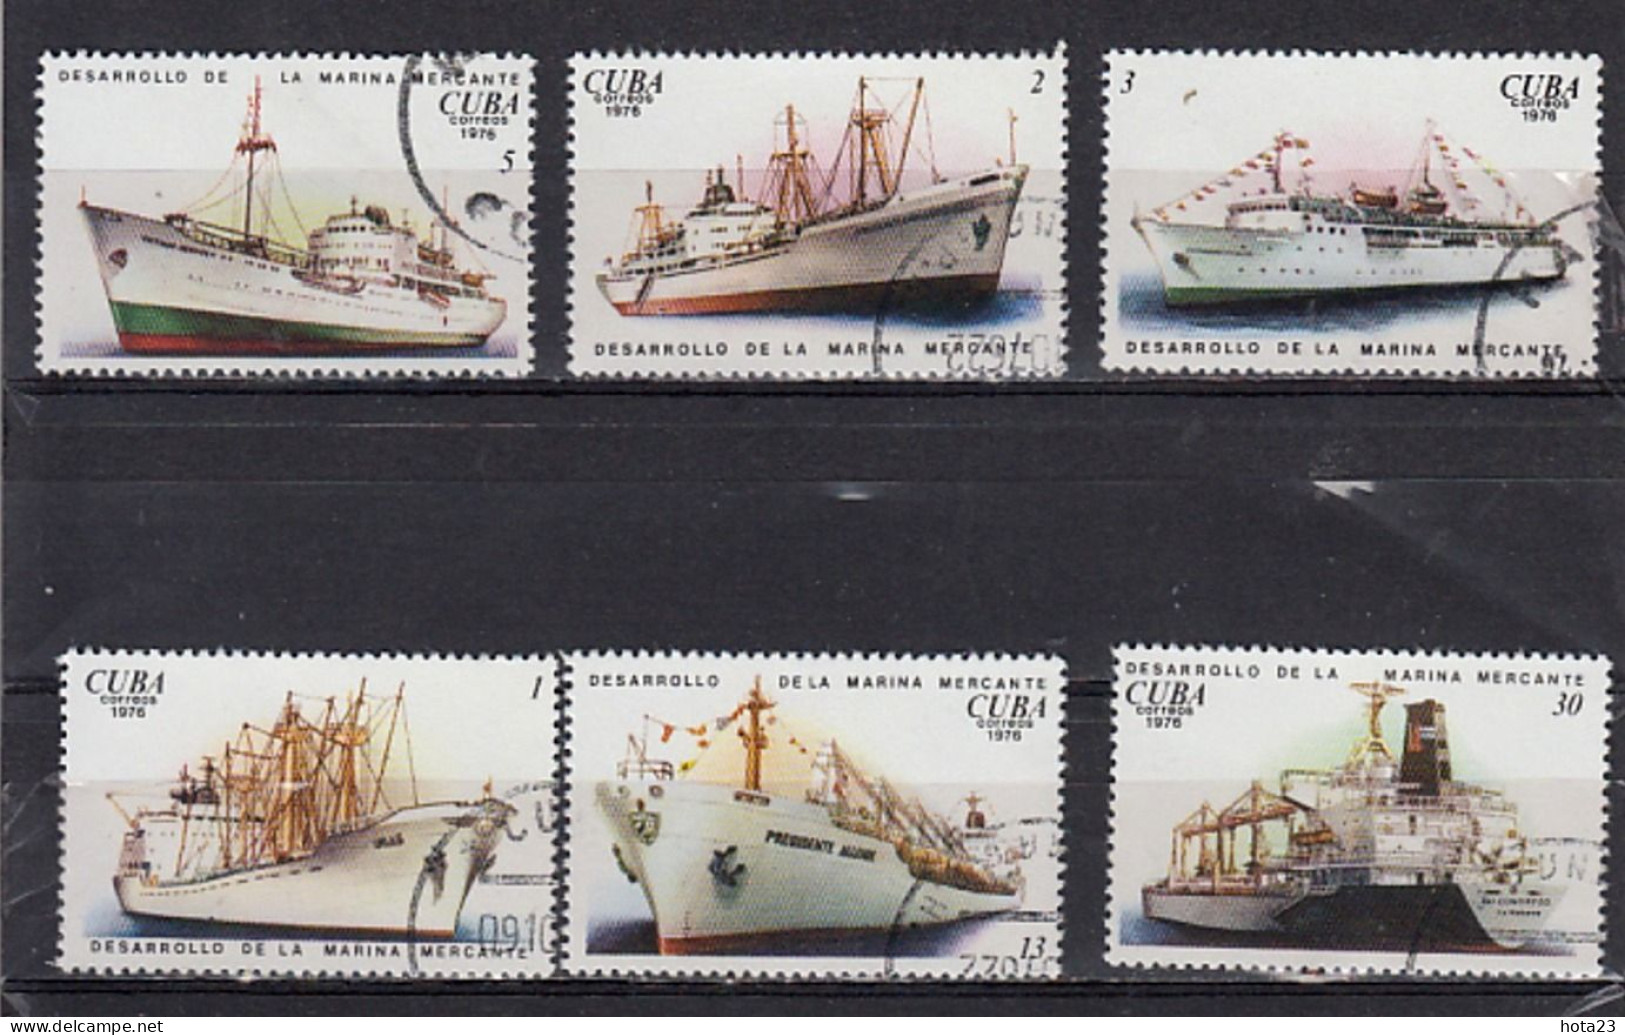 Cuba Caribbean Island 1976 -Cargo And Passenger Sips Complete Set. Mi ## 2162-2167  Used / Cto - Usados